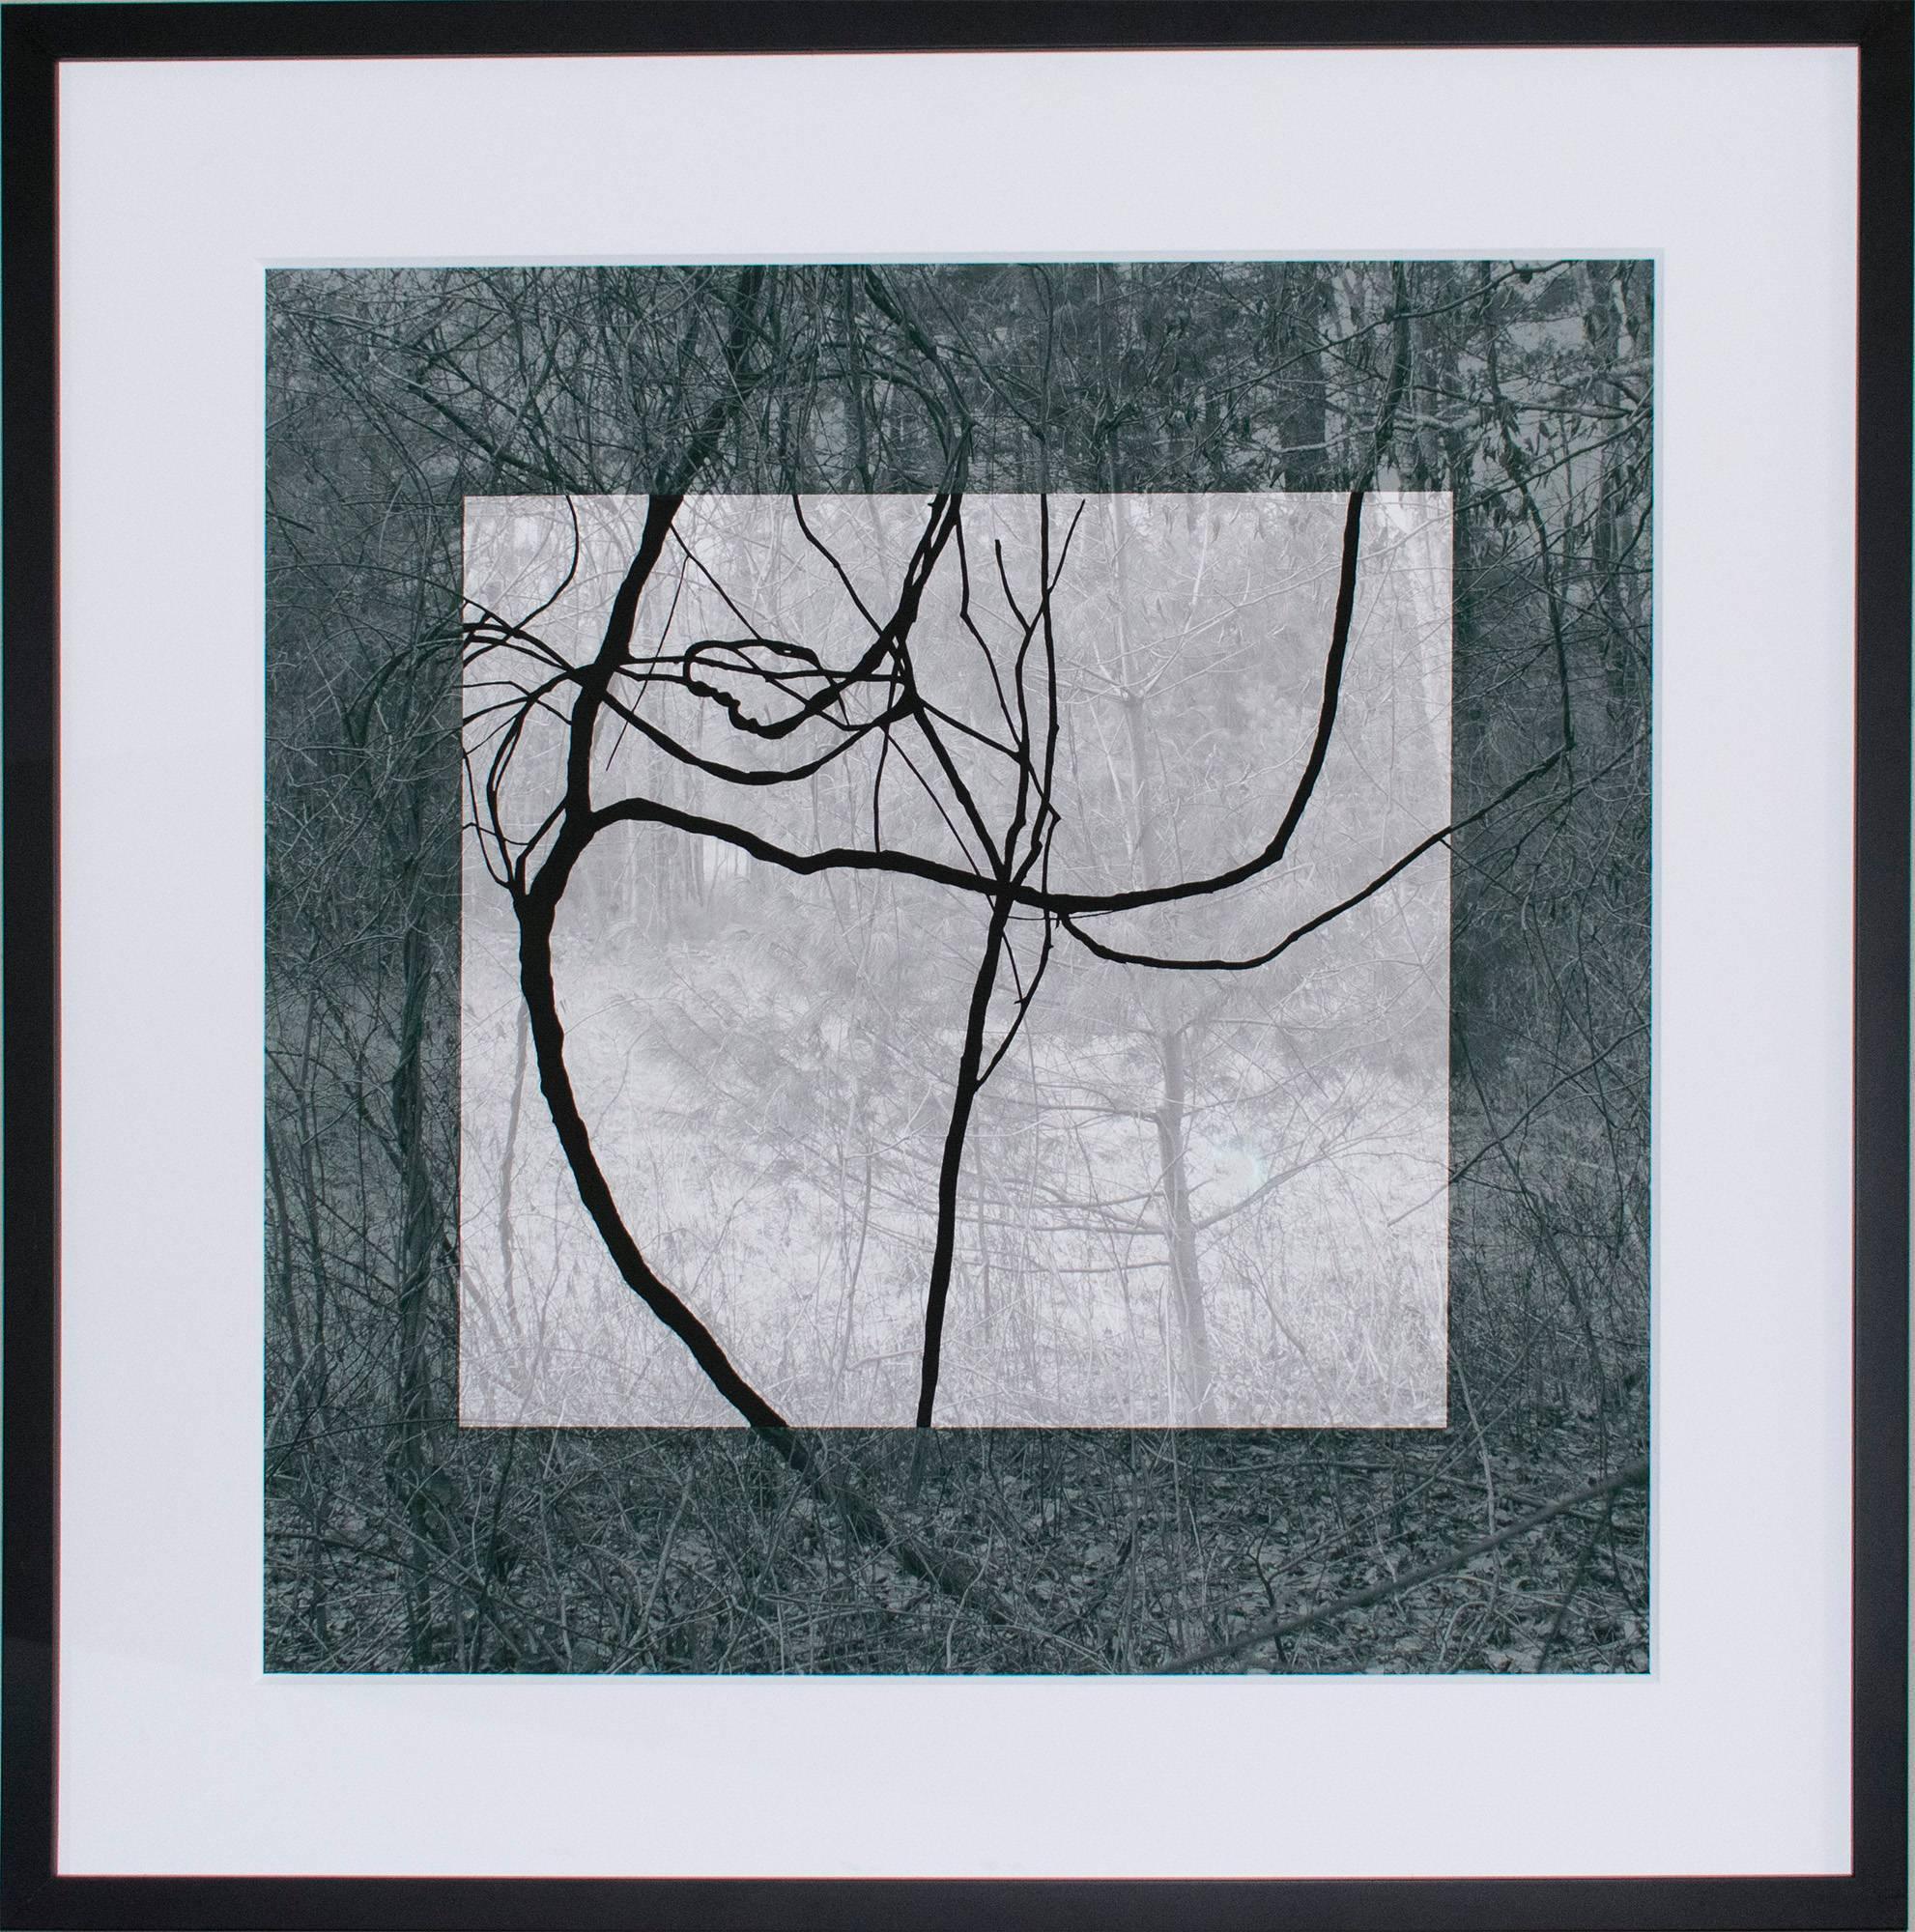 Blue Black (Contemporary Landscape Photo with Lyrical Vines and Geometric Shape) - Photograph by Stephanie Blumenthal